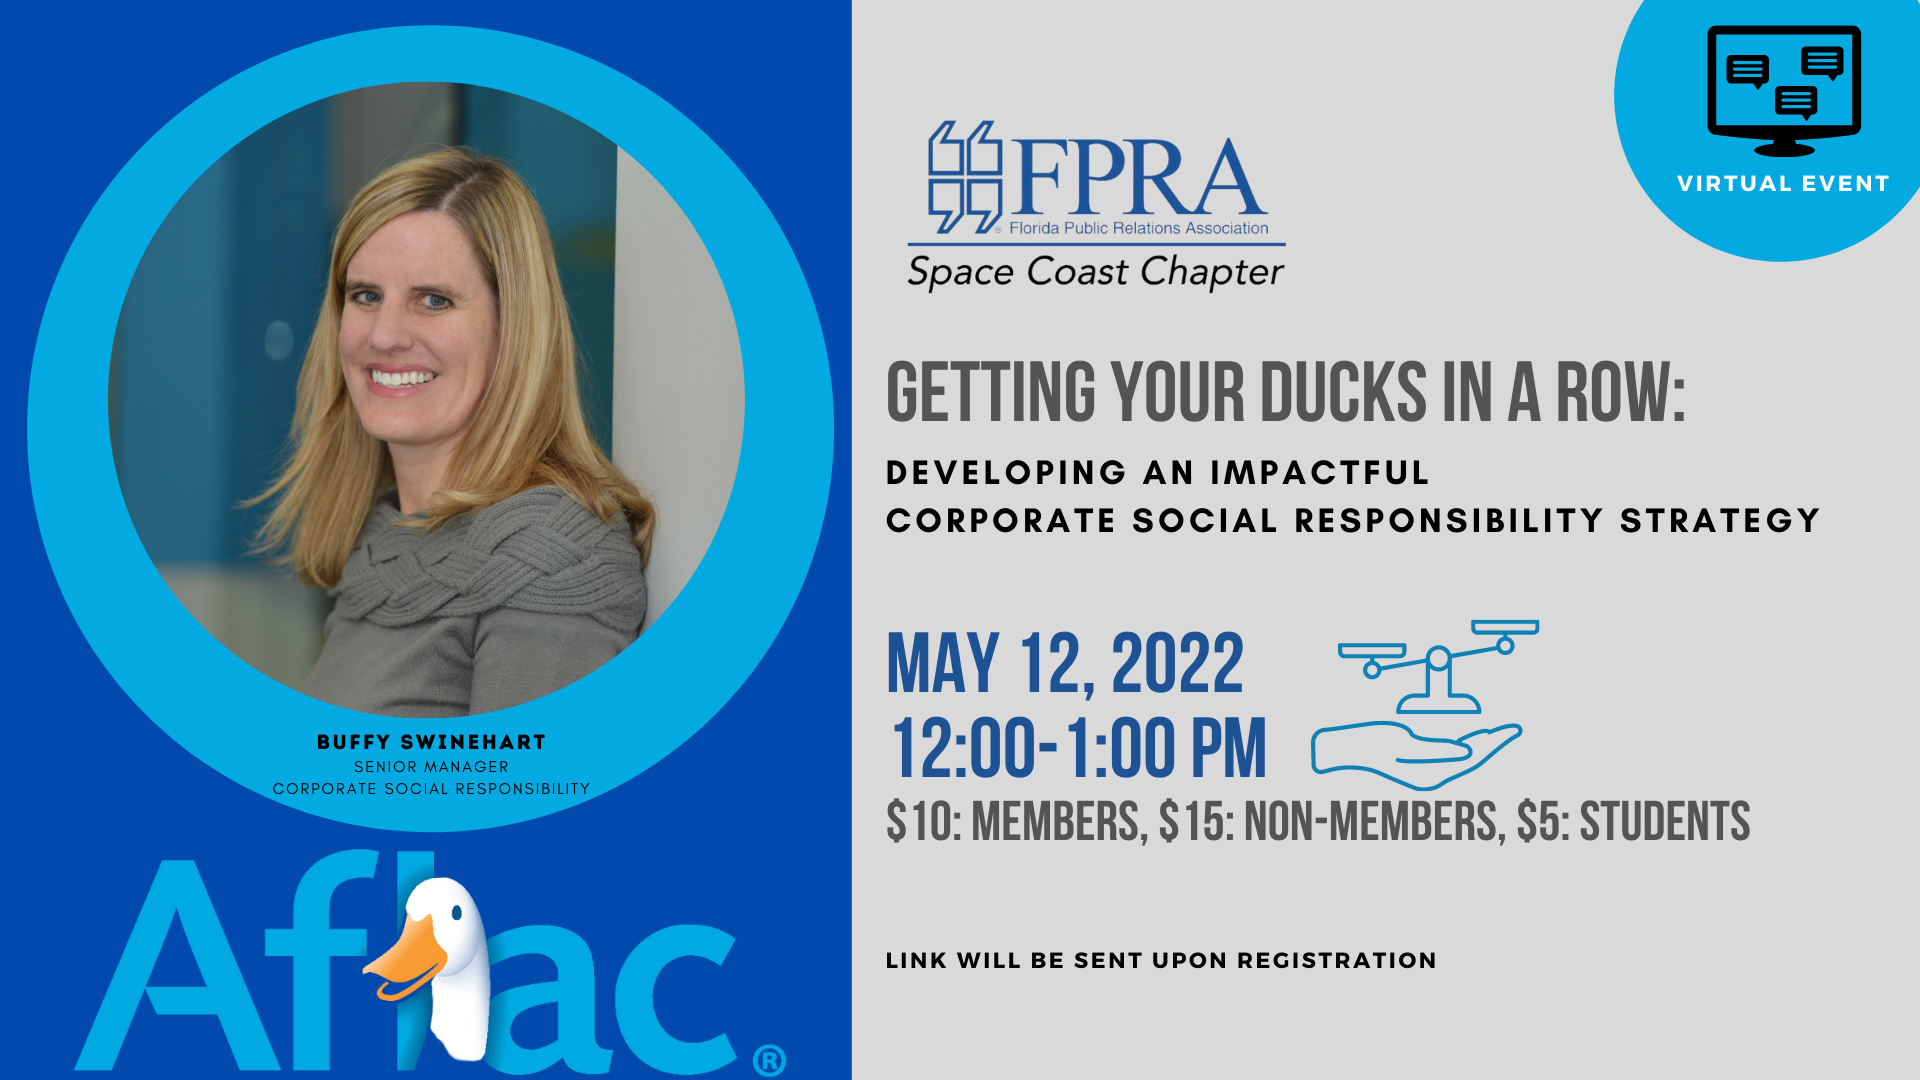 Getting Your Ducks in a Row: Developing an Impactful Corporate Social Responsibility Strategy